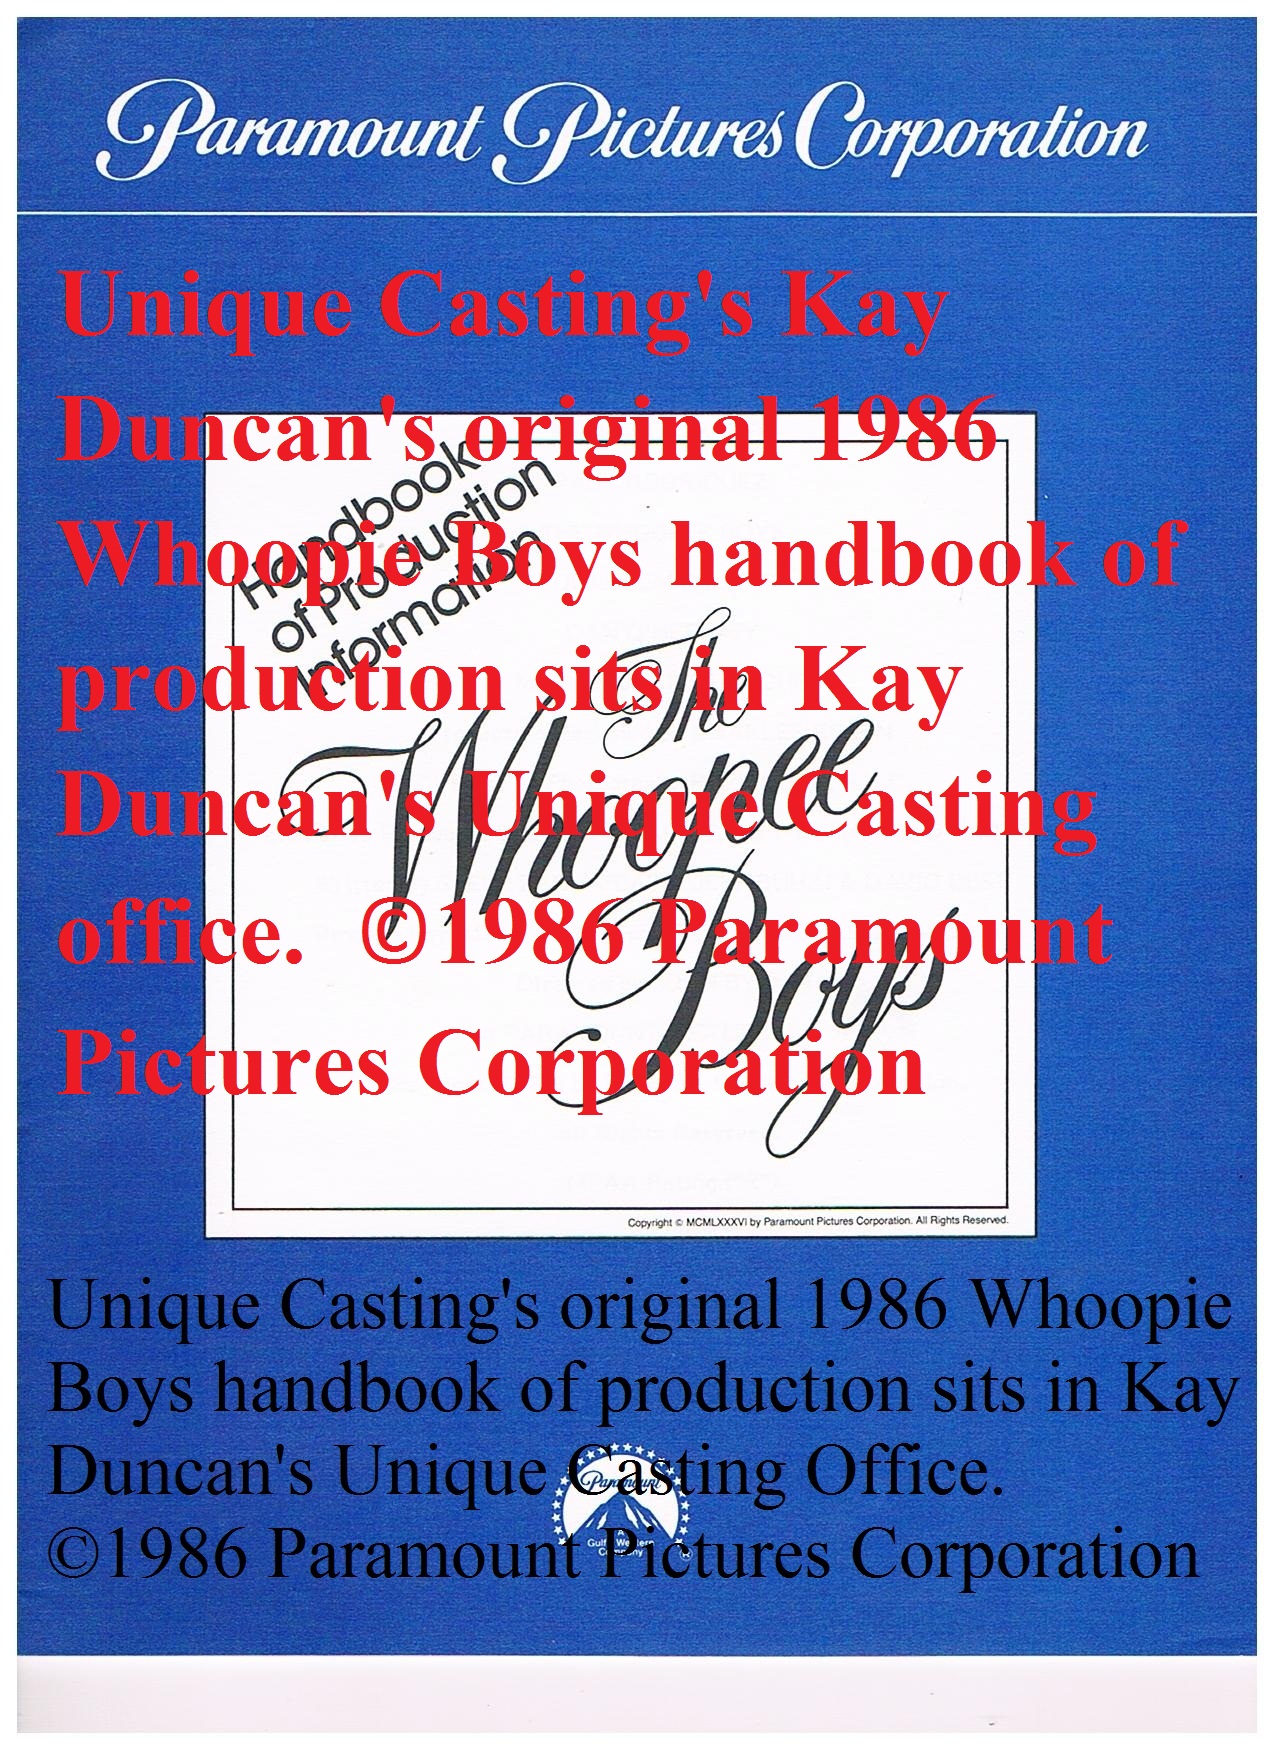 Unique Casting's original 1986 Whoopie Boys handbook of production sits in Kay Duncan's Unique Casting Office. ©1986 Paramount Pictures Corporation